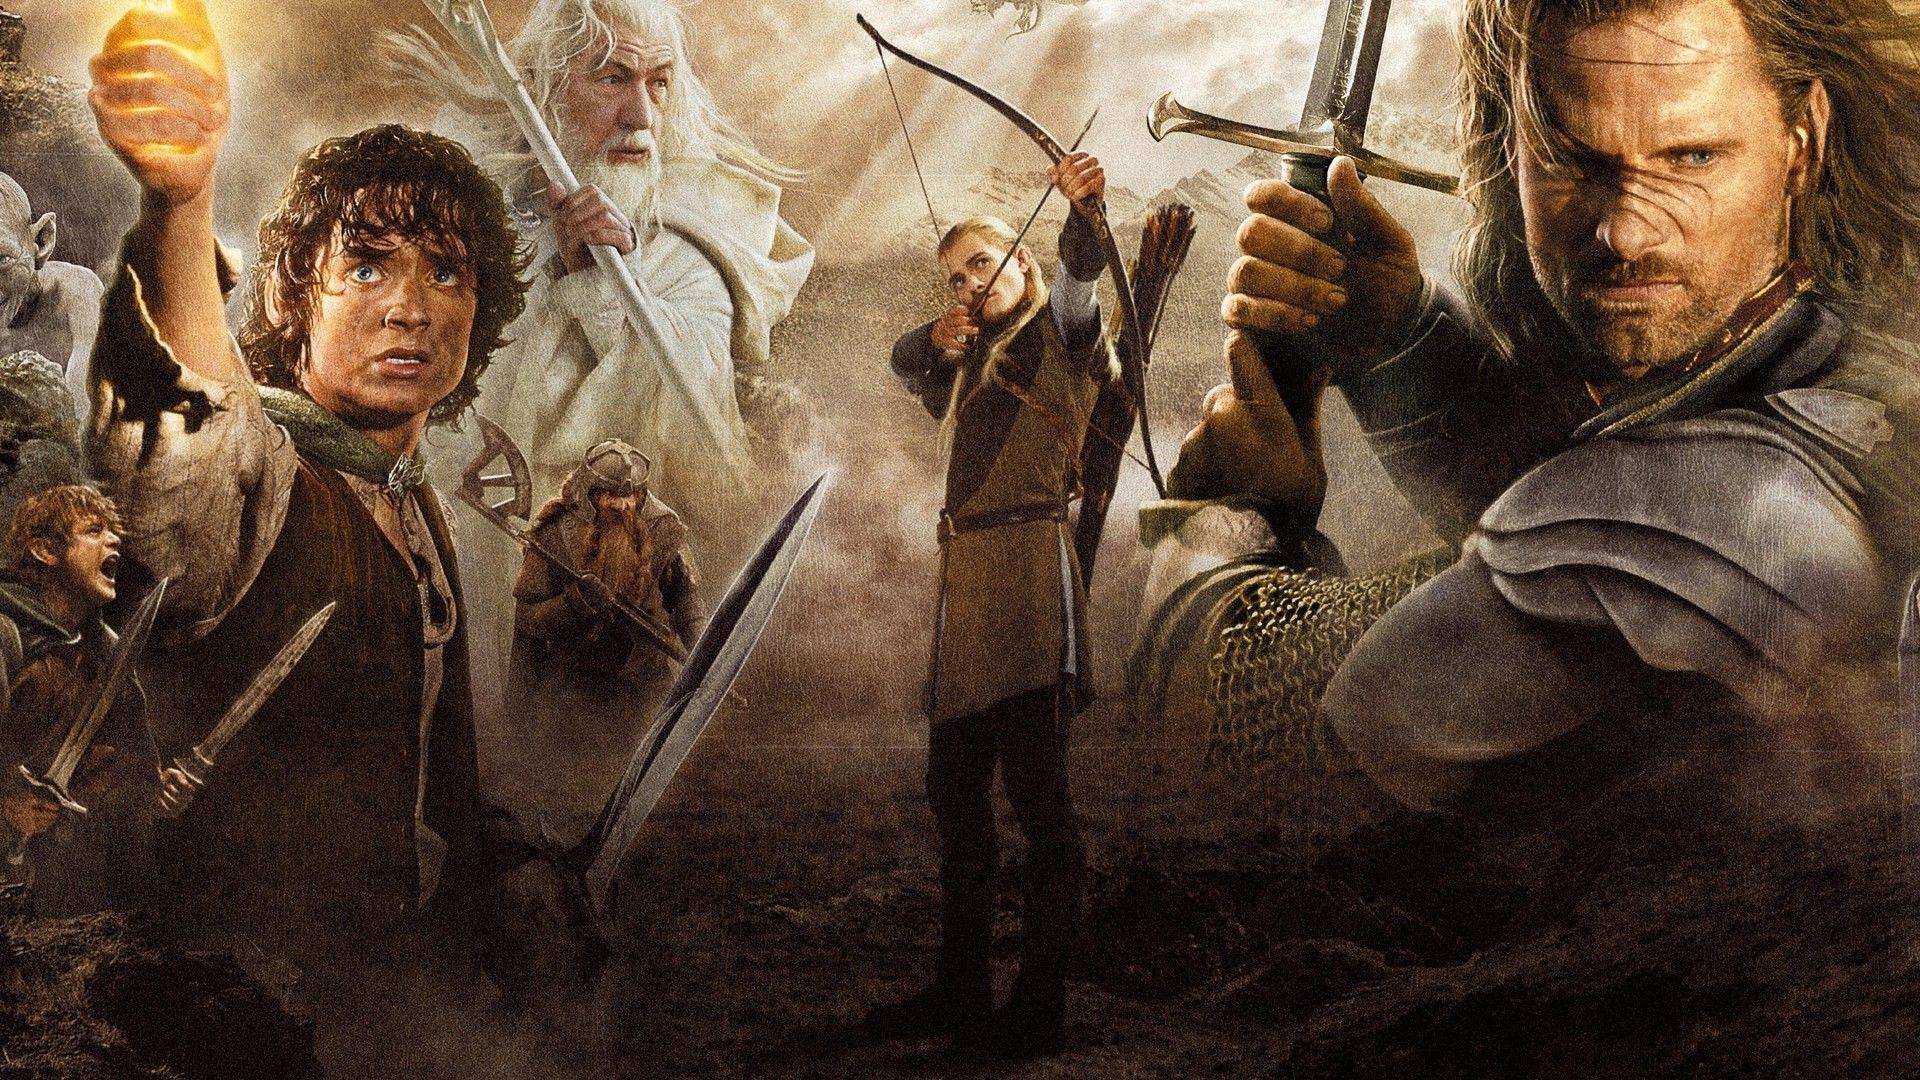 The Lord of the Rings: The Return of the King Wallpaper 10 X